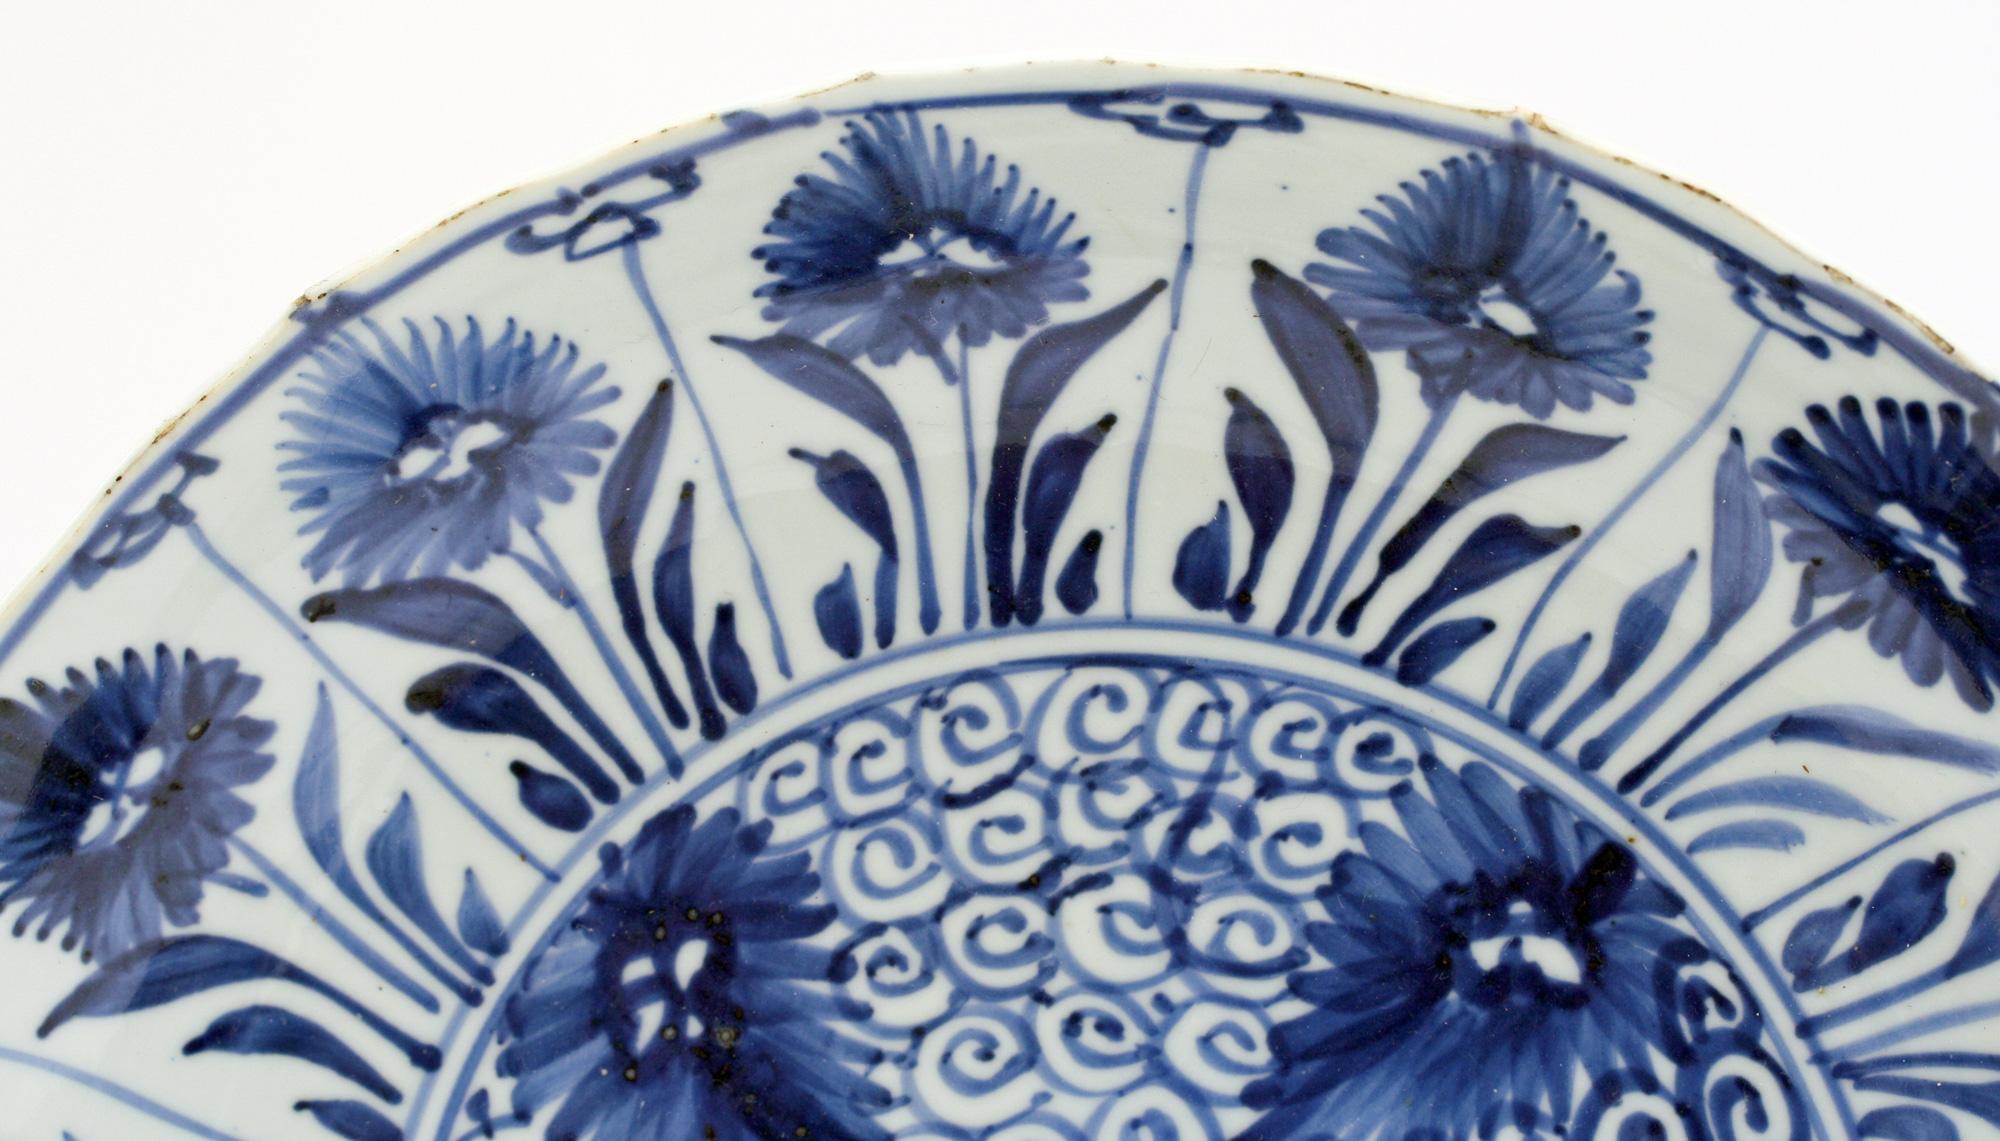 chinese porcelain patterns